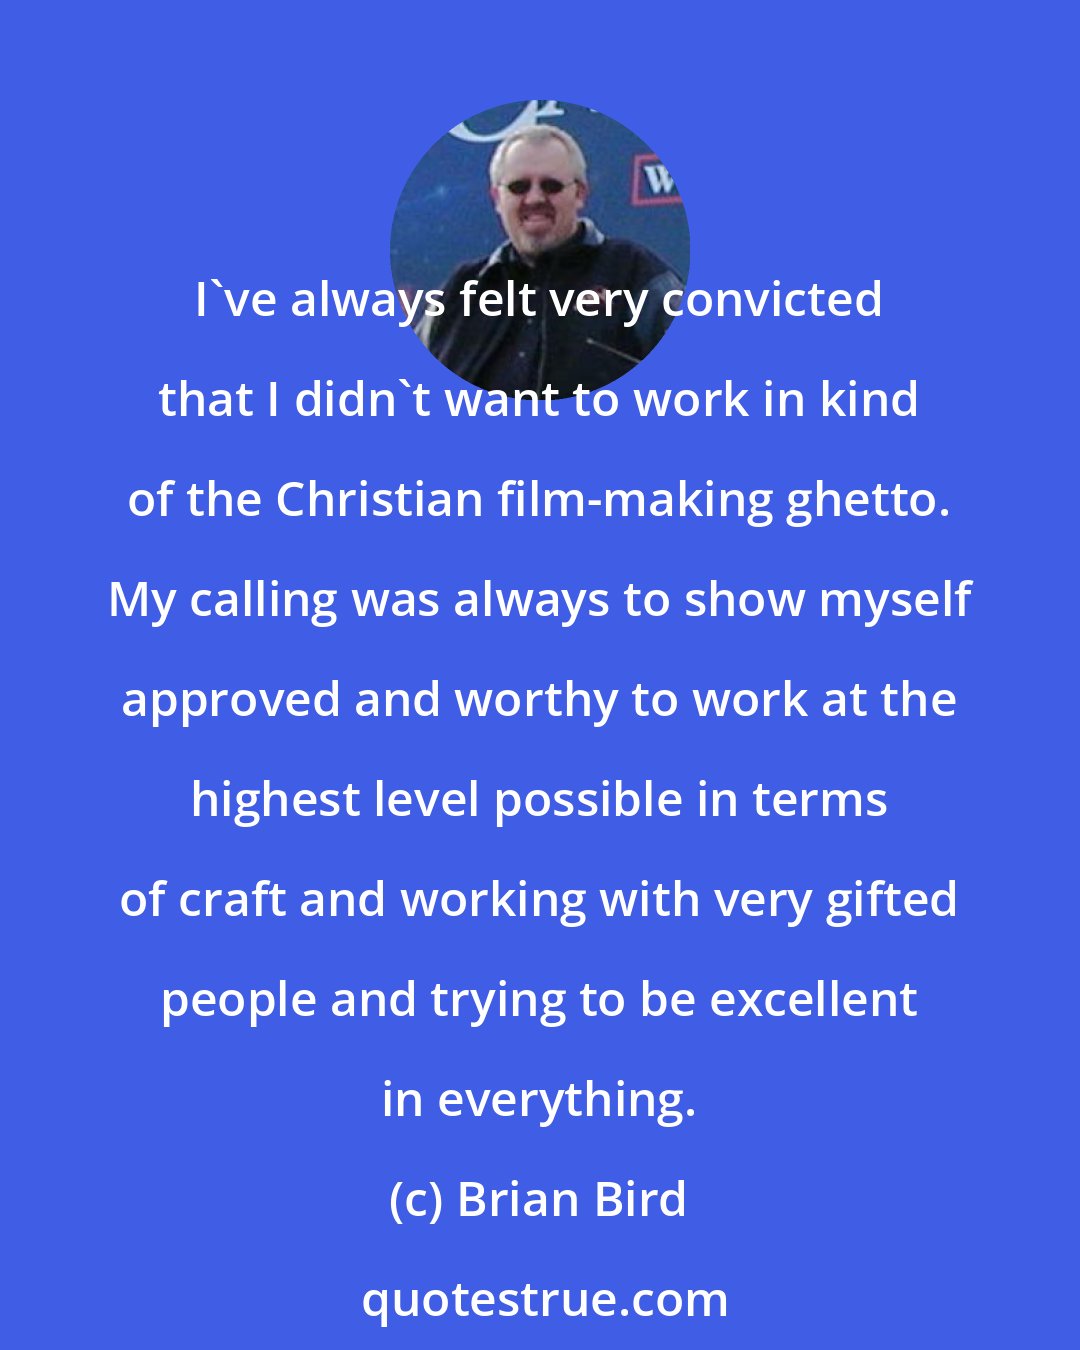 Brian Bird: I've always felt very convicted that I didn't want to work in kind of the Christian film-making ghetto. My calling was always to show myself approved and worthy to work at the highest level possible in terms of craft and working with very gifted people and trying to be excellent in everything.